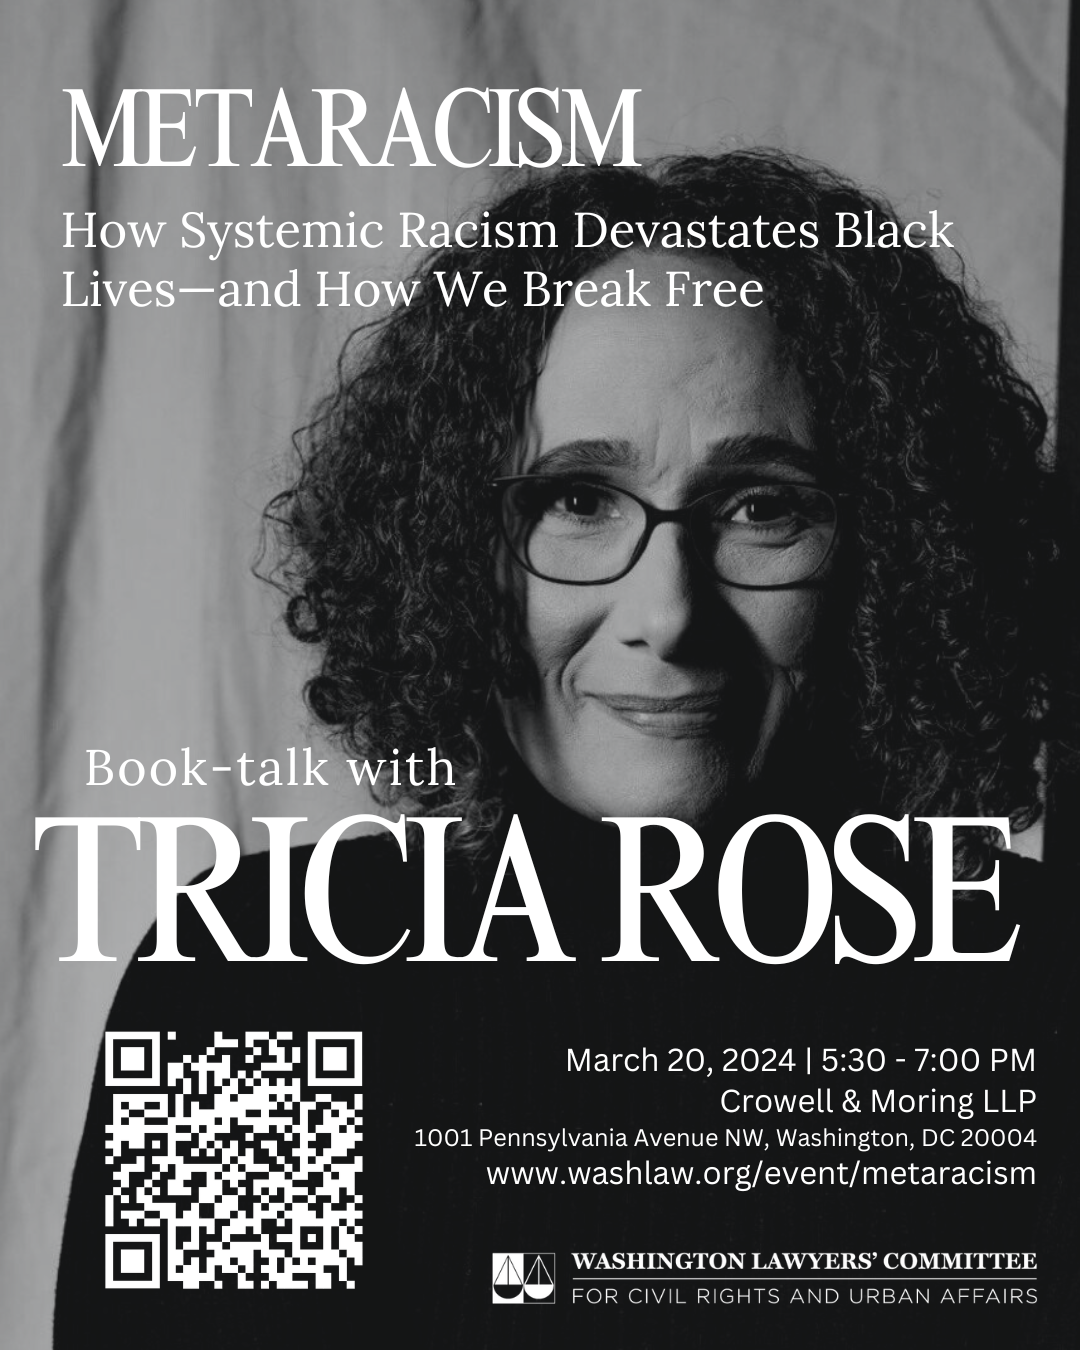 Black and white photo of Tricia Rose with overlaying white text that reads "MetaRacism: How Systemic Racism Devastates Black Lives—and How We Break Free Tricia Rose Book-talk with March 20, 2024 | 5:30 - 7:00 PM | Crowell & Moring LLP 1001 Pennsylvania Avenue NW, Washington, DC 20004 washlaw.org/event/metaracism"